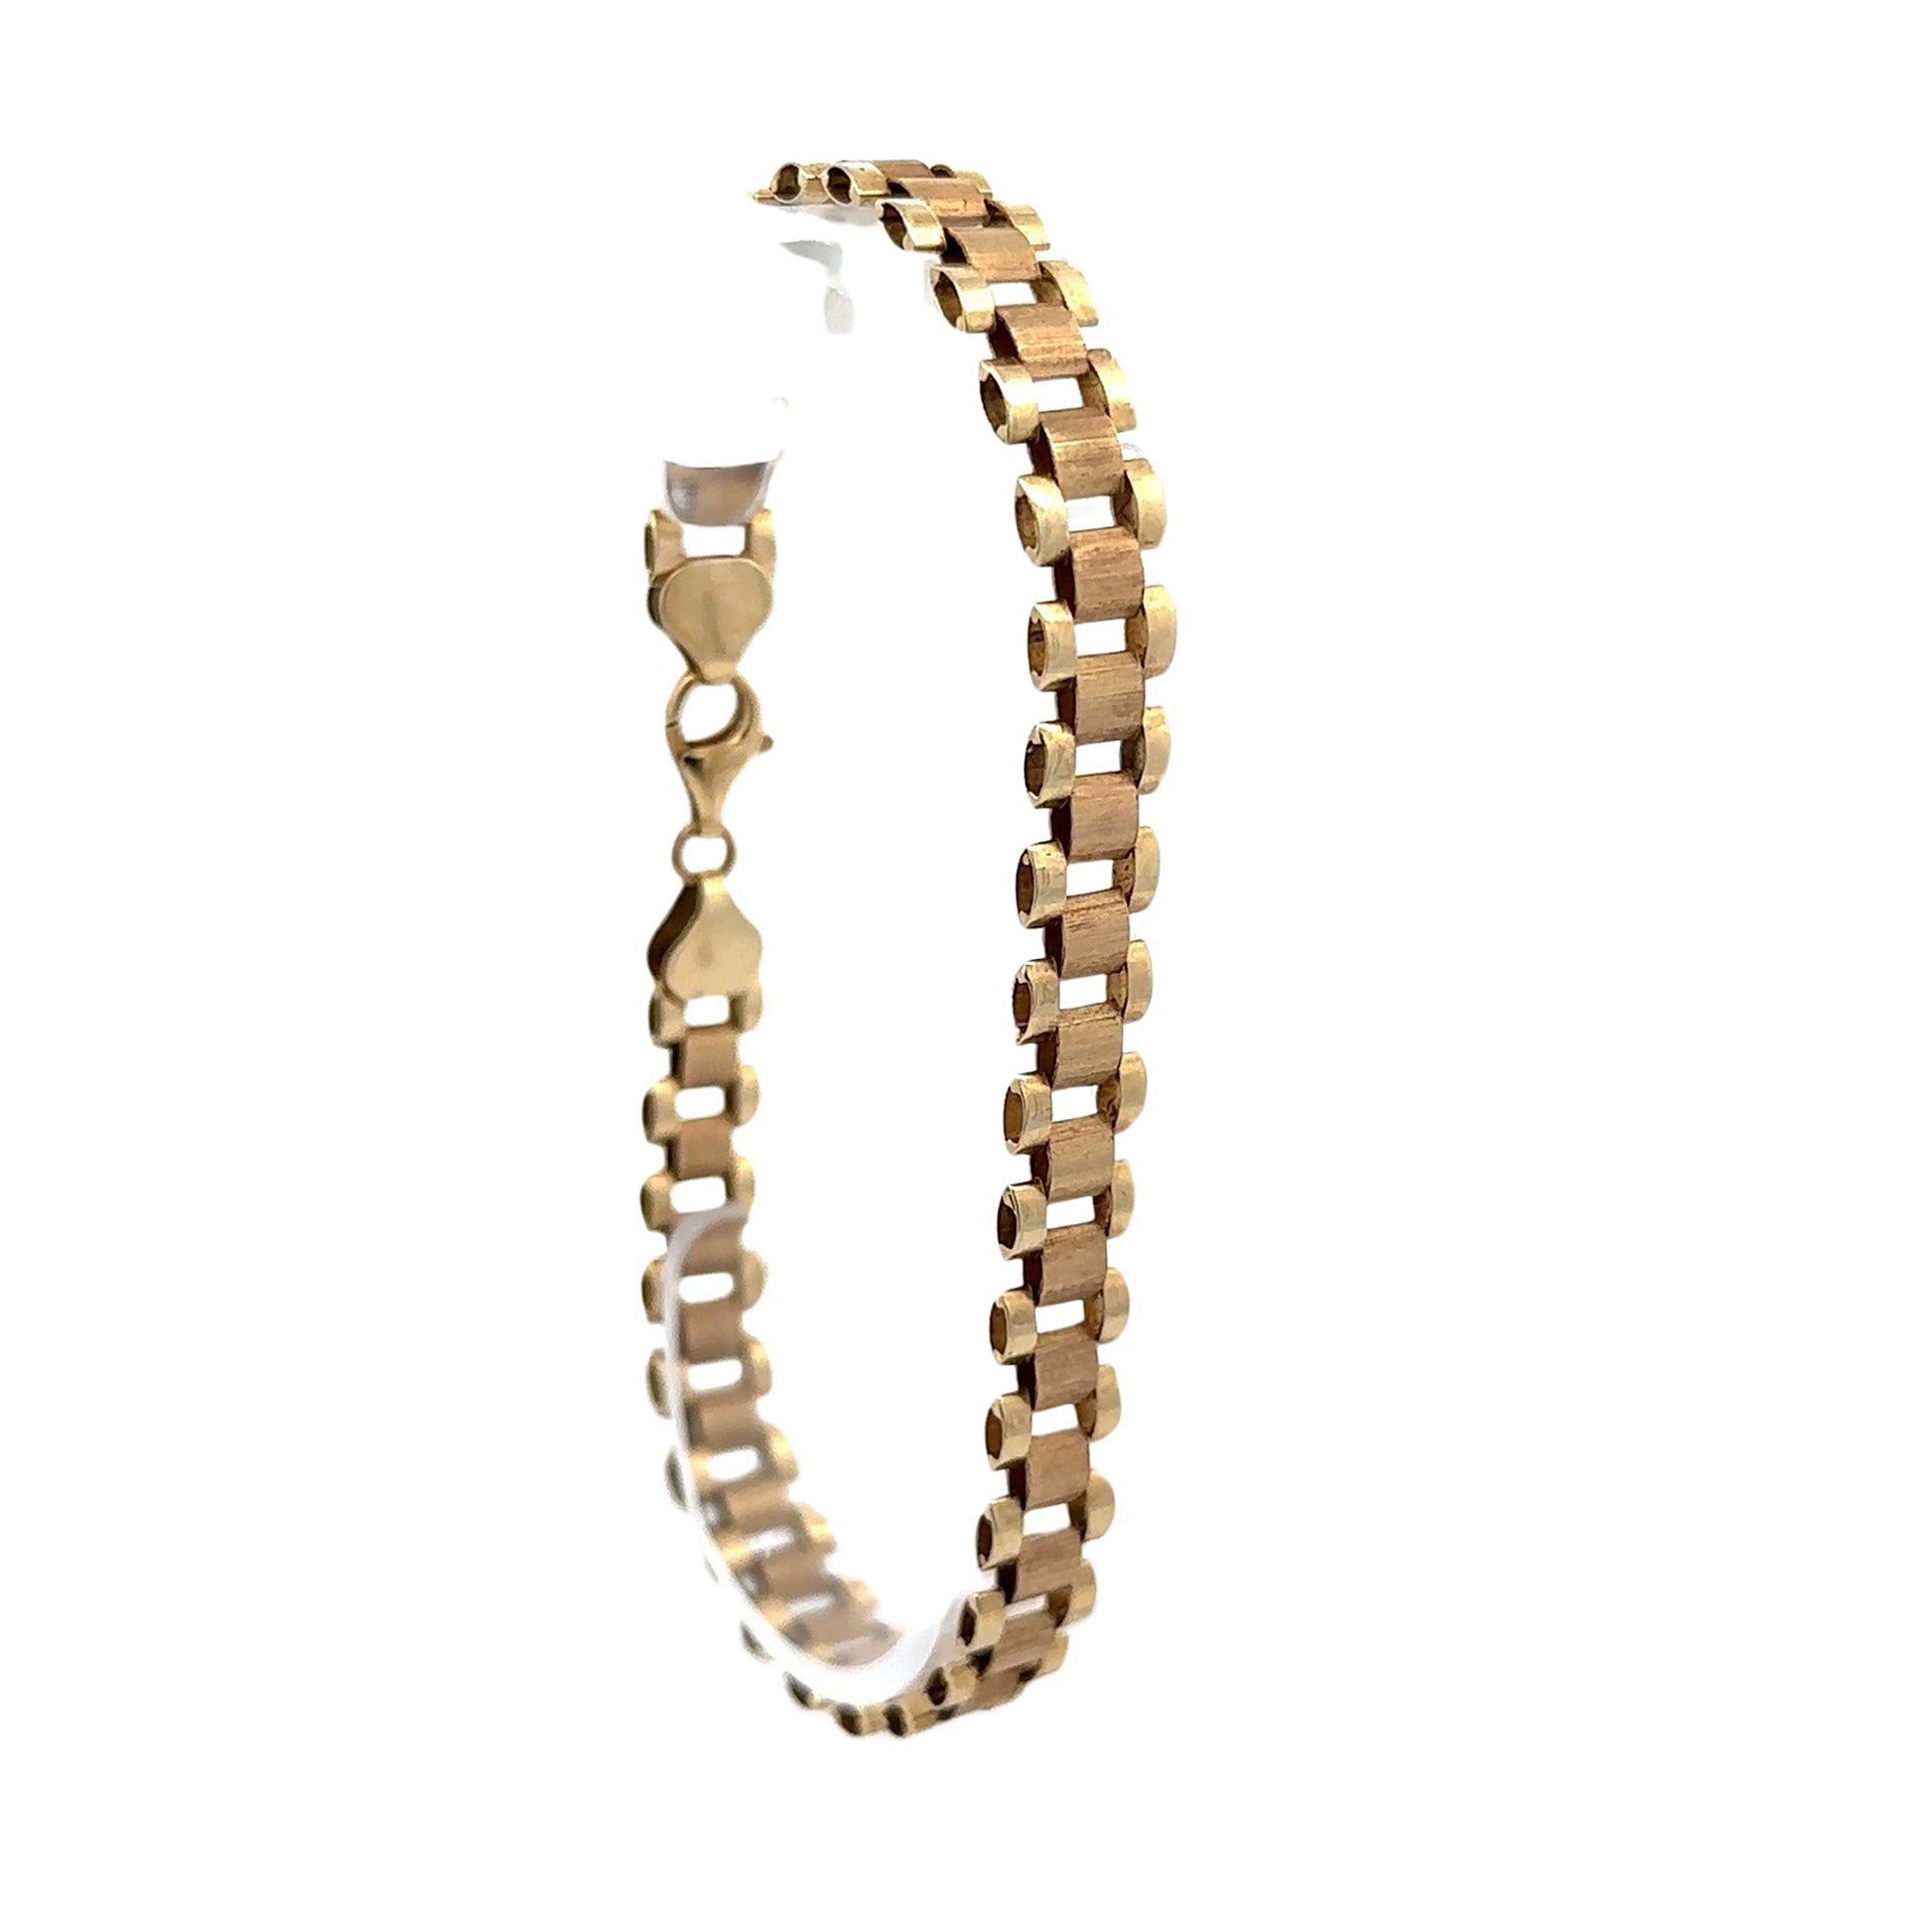 Diagonal view of yellow gold rolex style bracelet